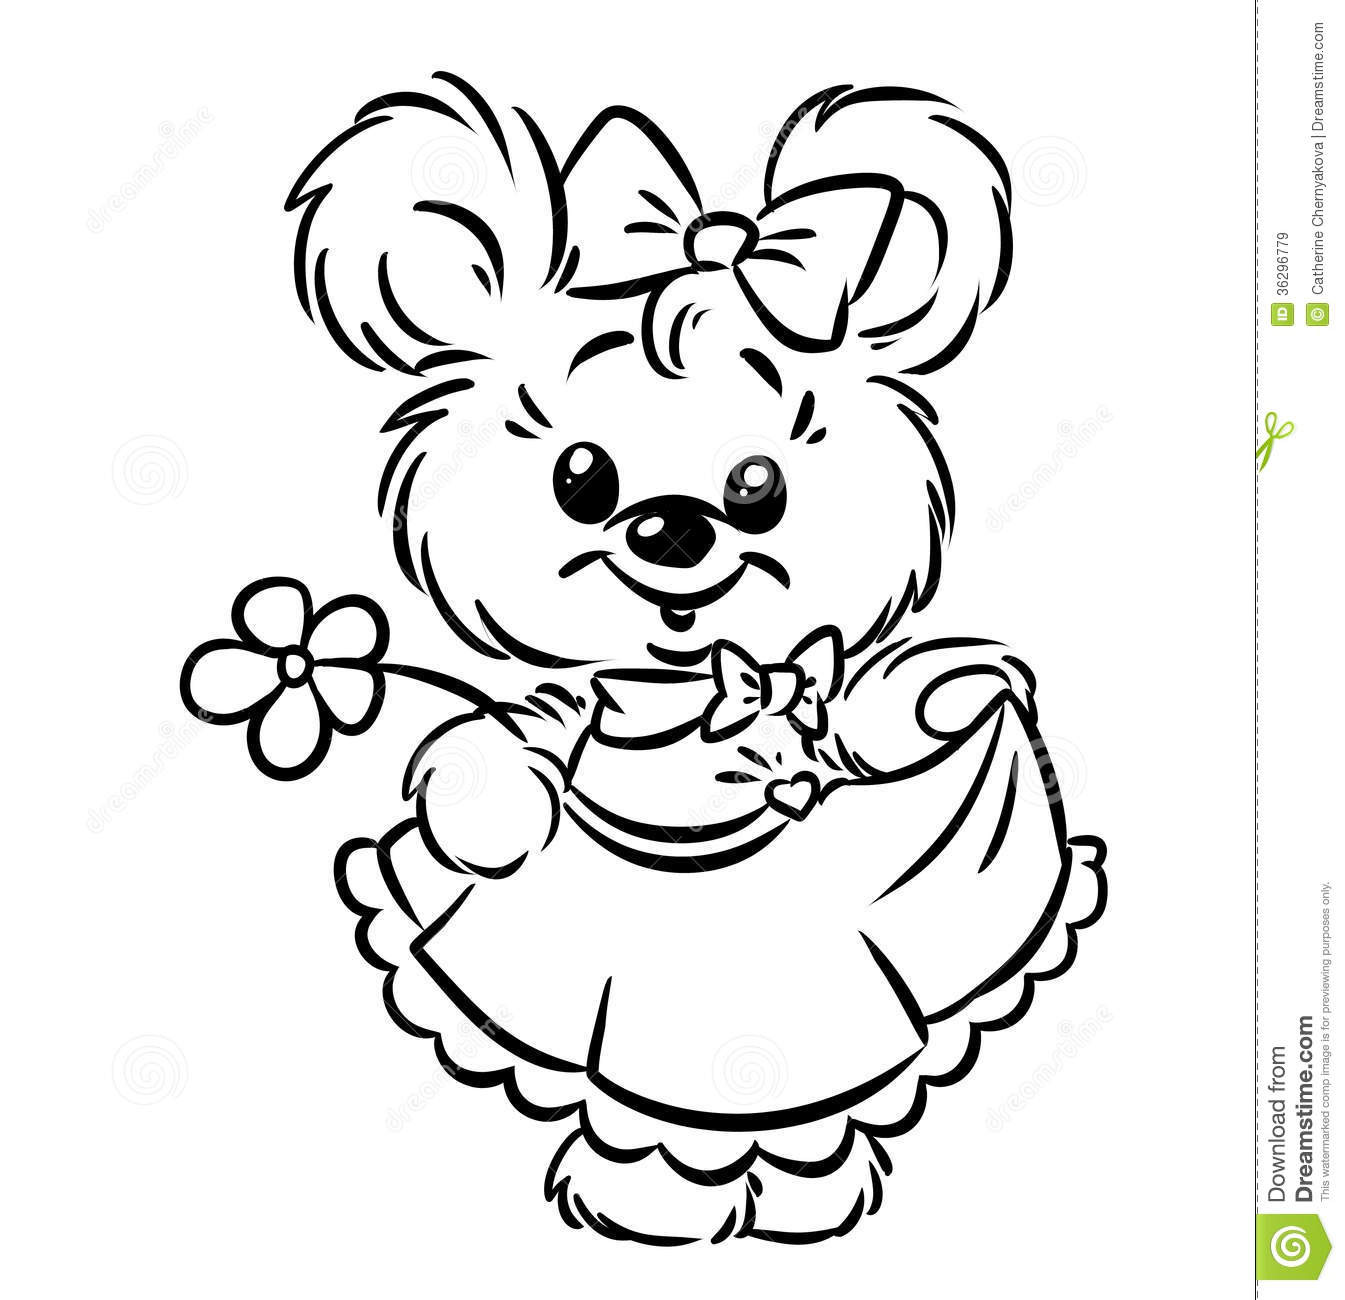 Coloring Pages For Girls Flowers
 Bear Girl Flower Coloring Pages Stock Illustration